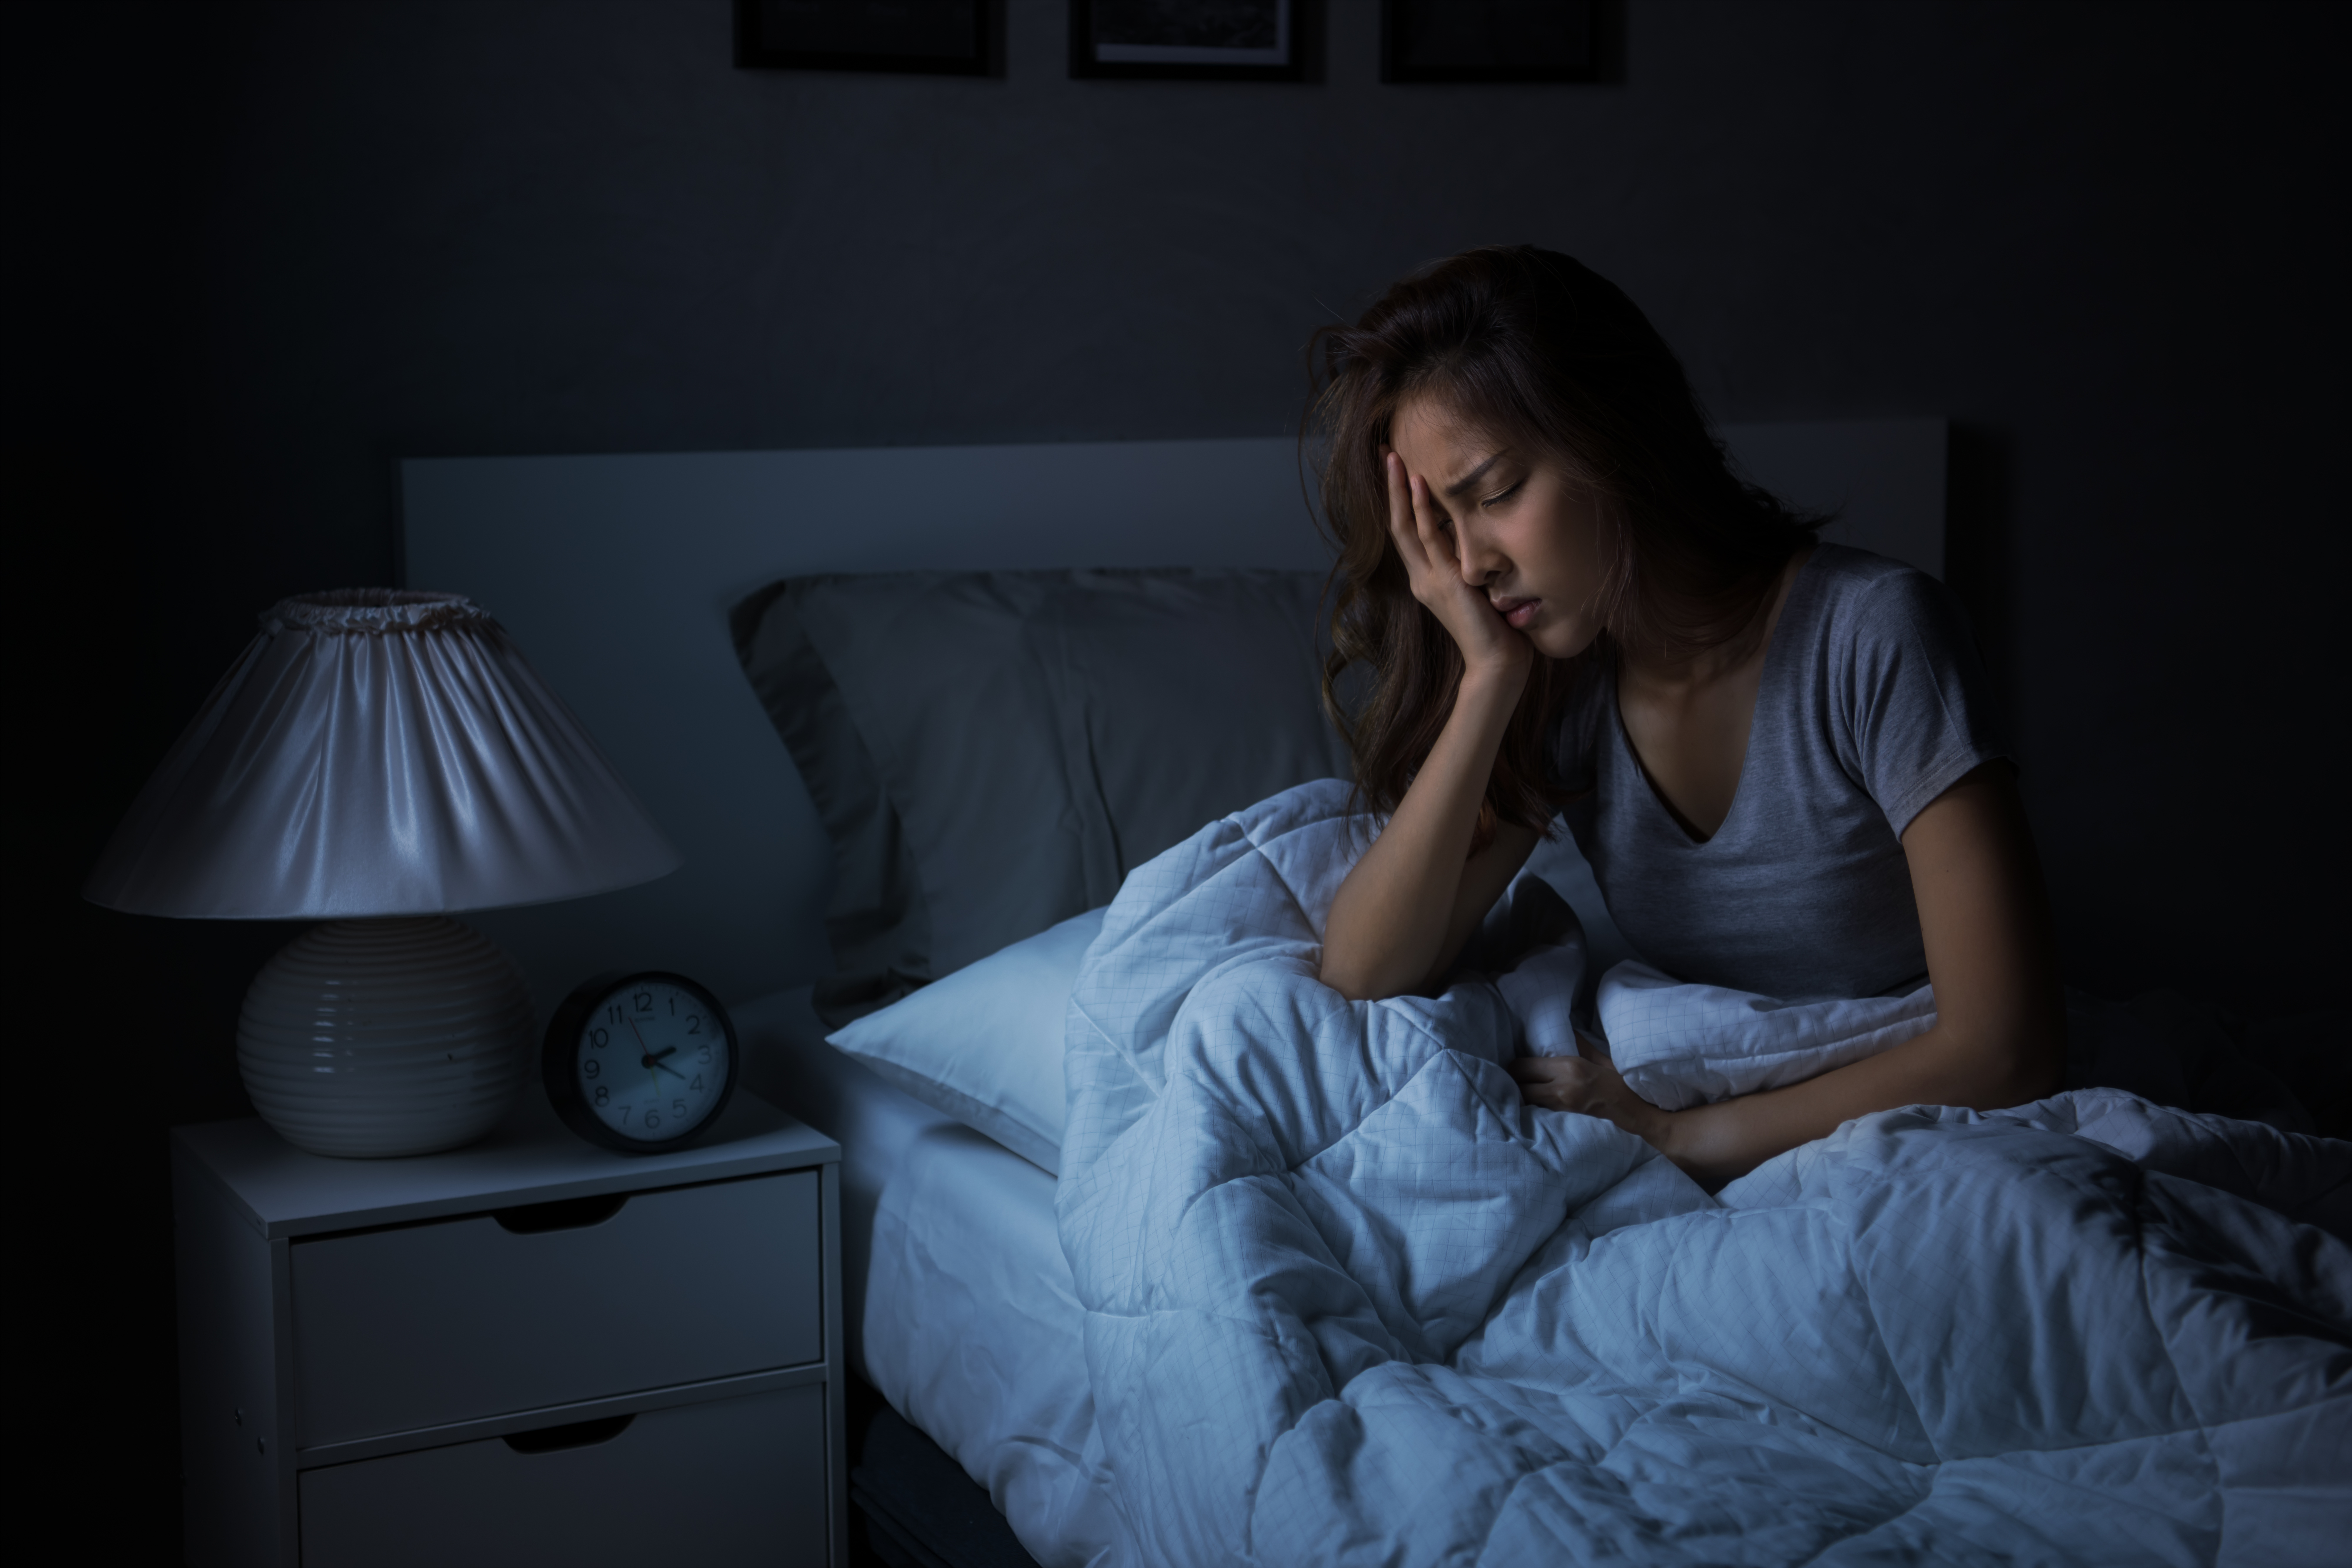 Depressed young woman sitting in bed cannot sleep from insomnia. | Source: Shutterstock